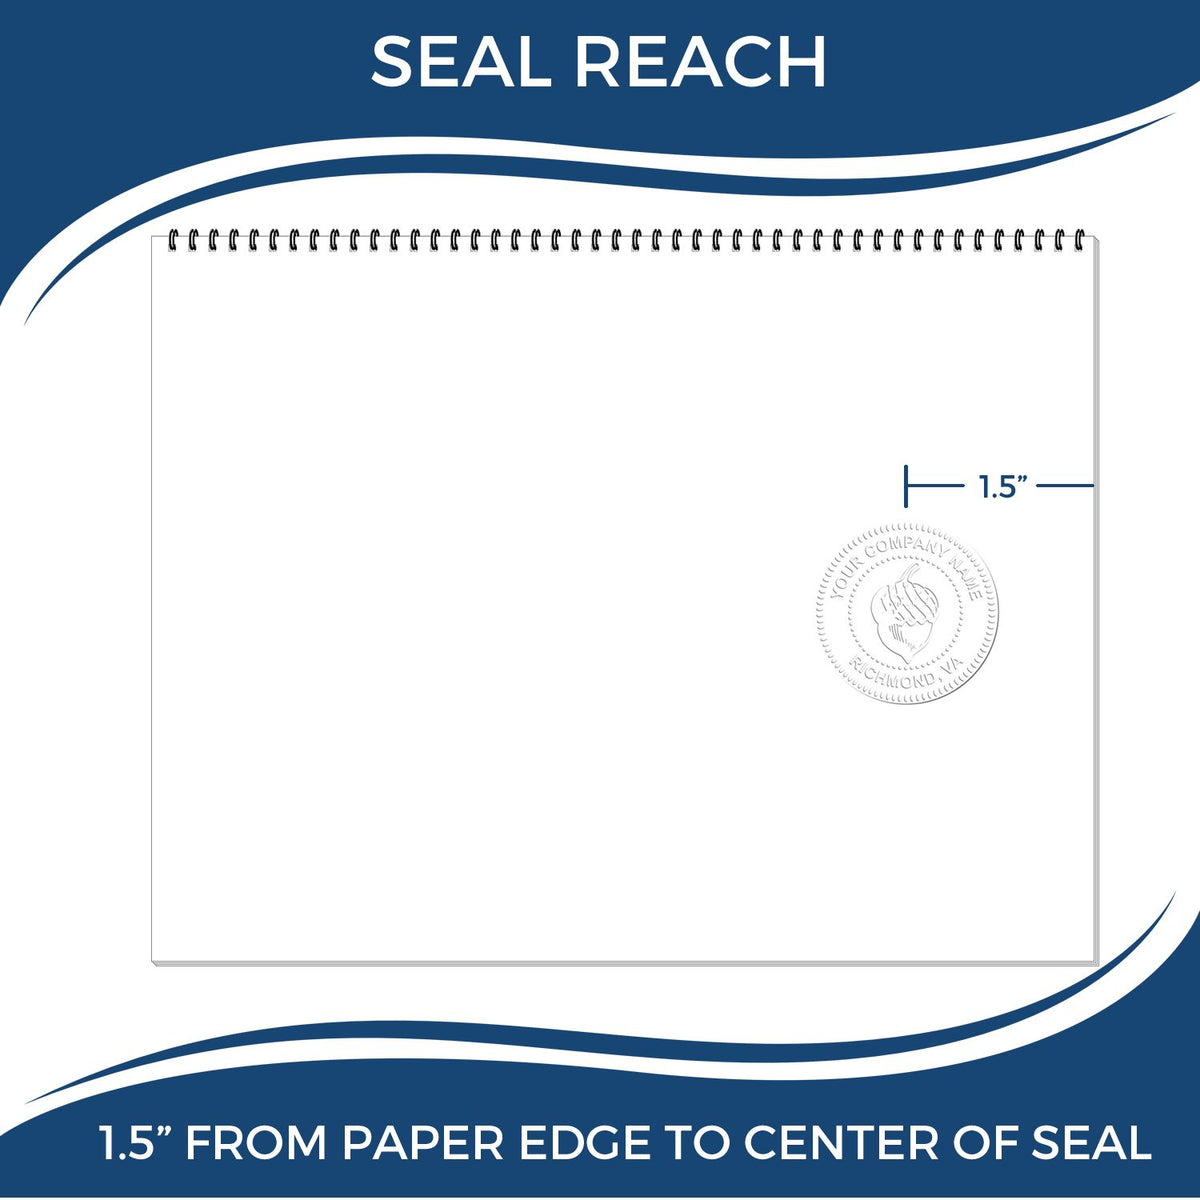 An infographic showing the seal reach which is represented by a ruler and a miniature seal image of the Gift Maryland Land Surveyor Seal